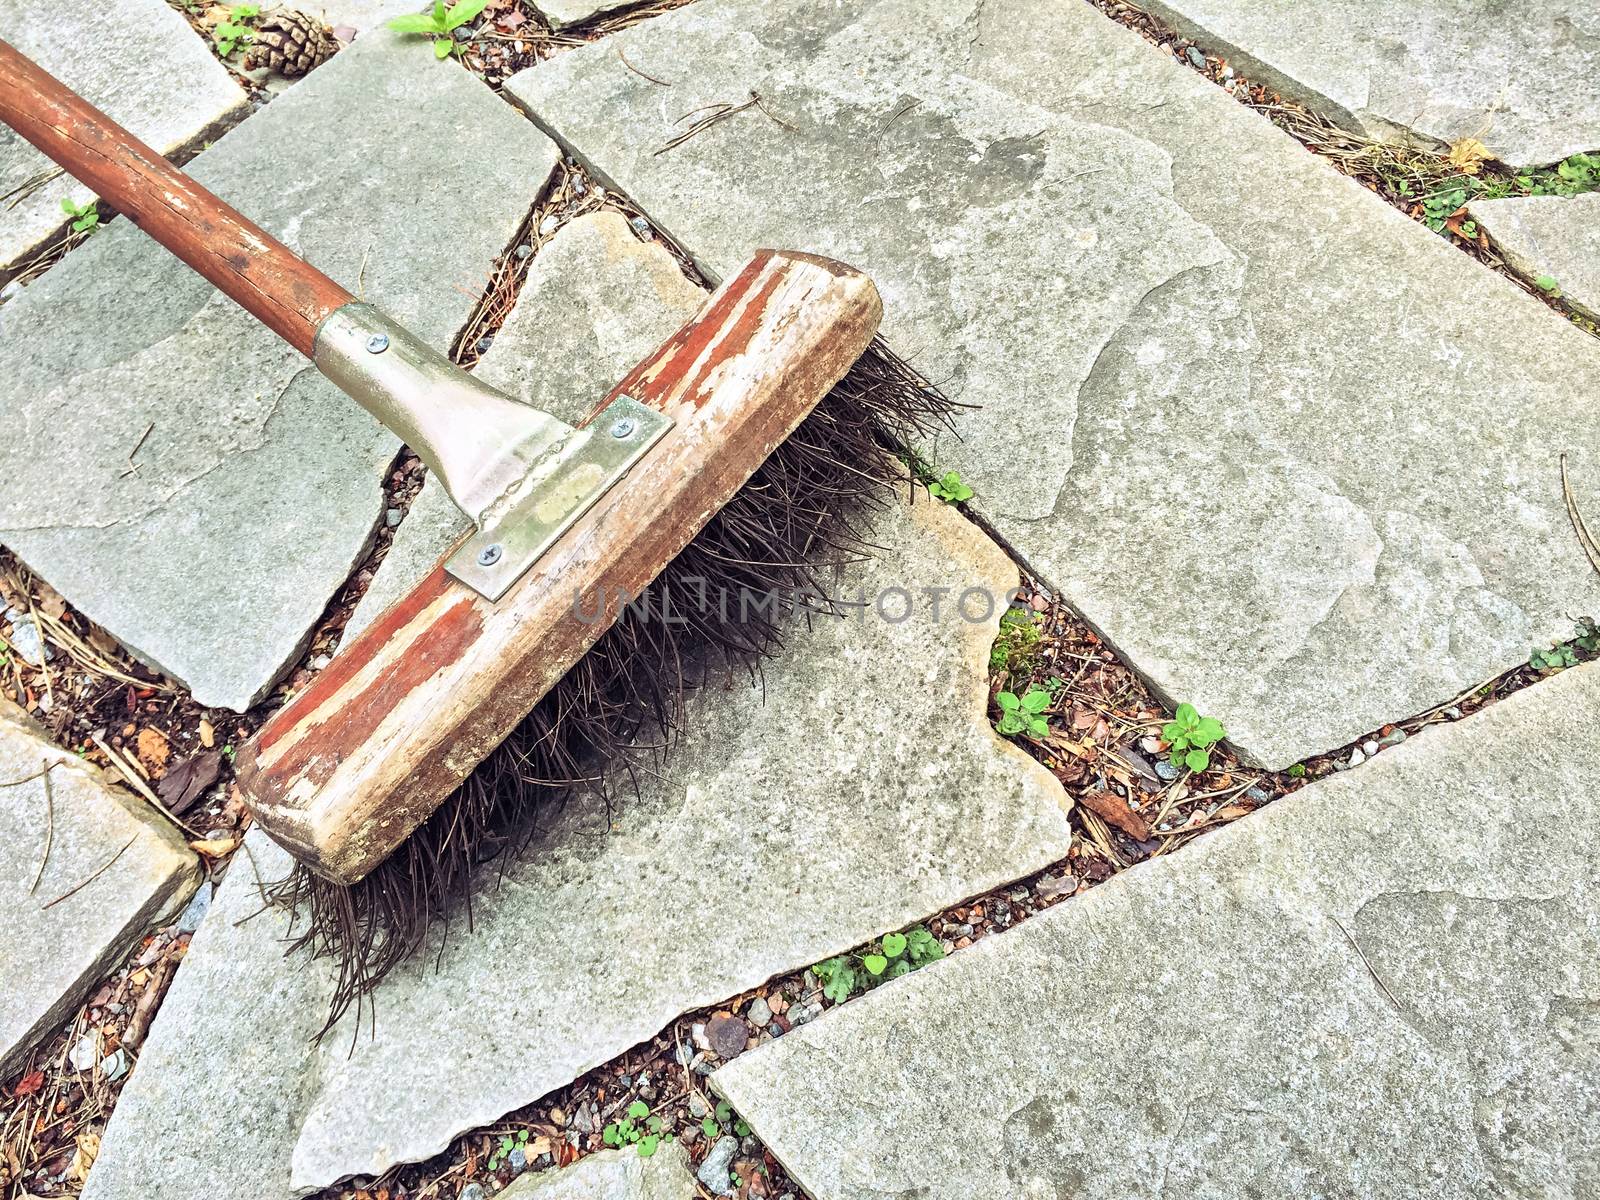 Rustic style broom on stone path in the garden.